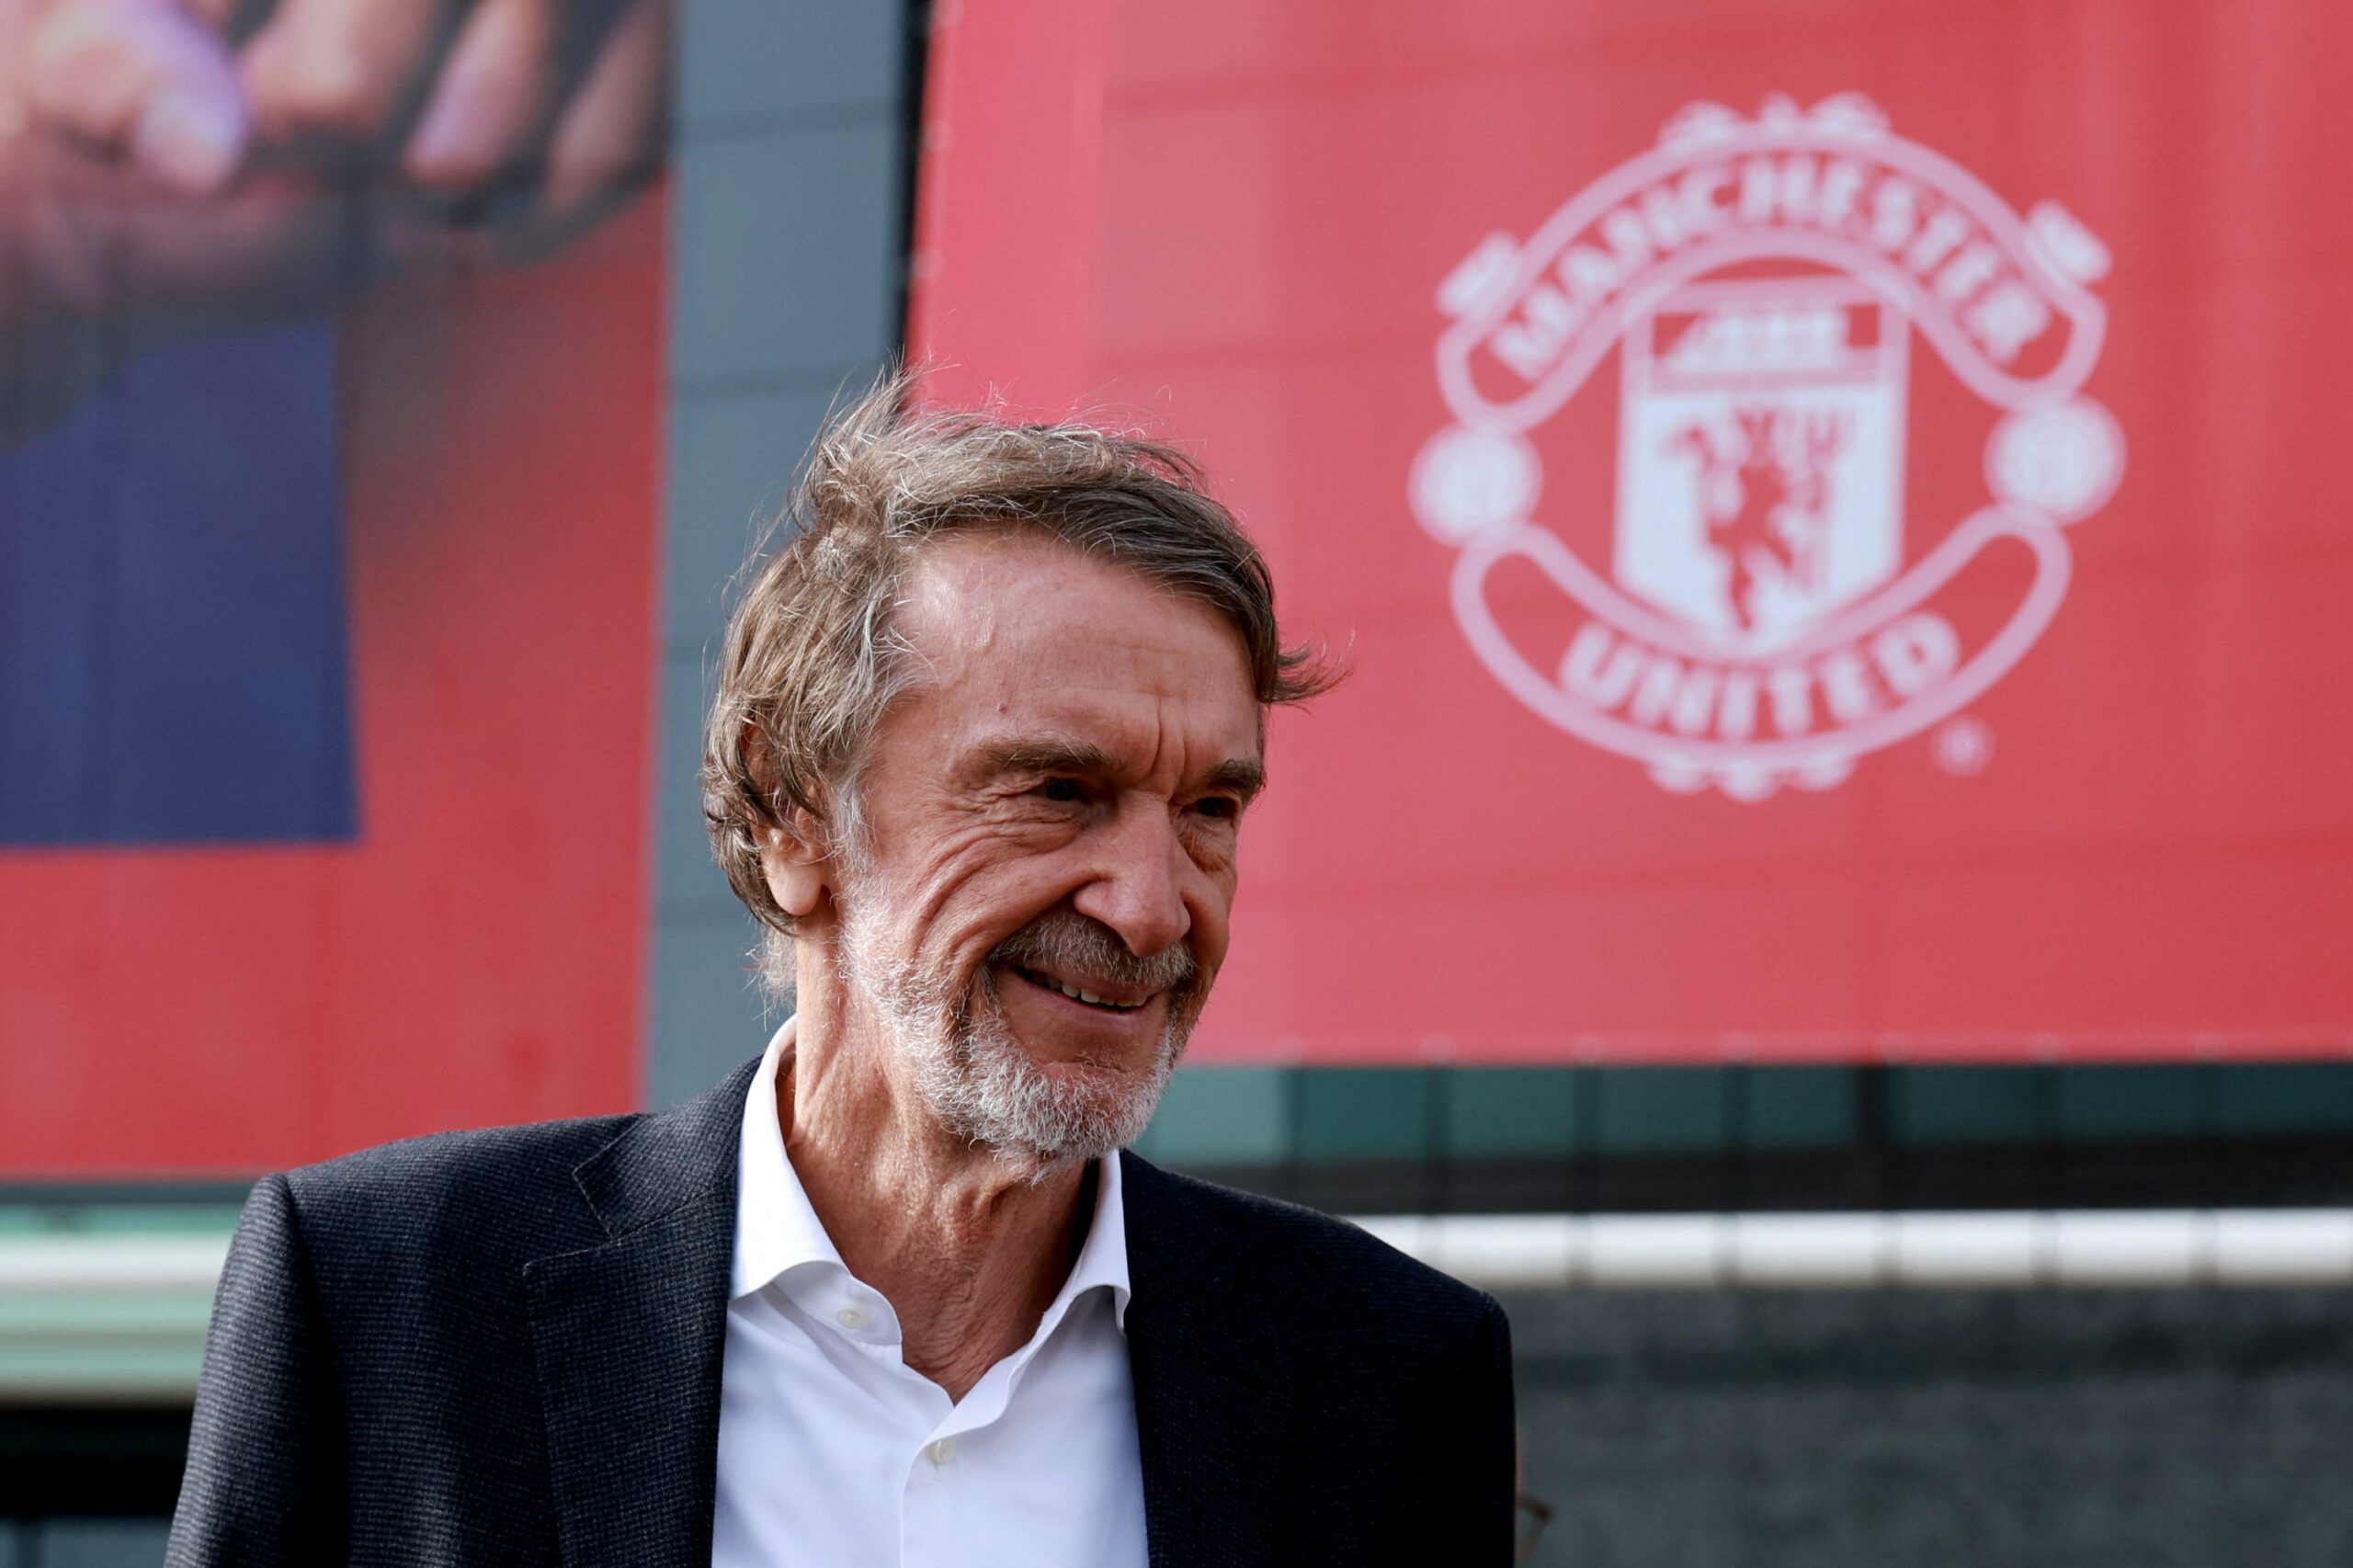 Old Trafford redevelopment: Sir Jim Ratcliffe wants ‘national stadium in the north’